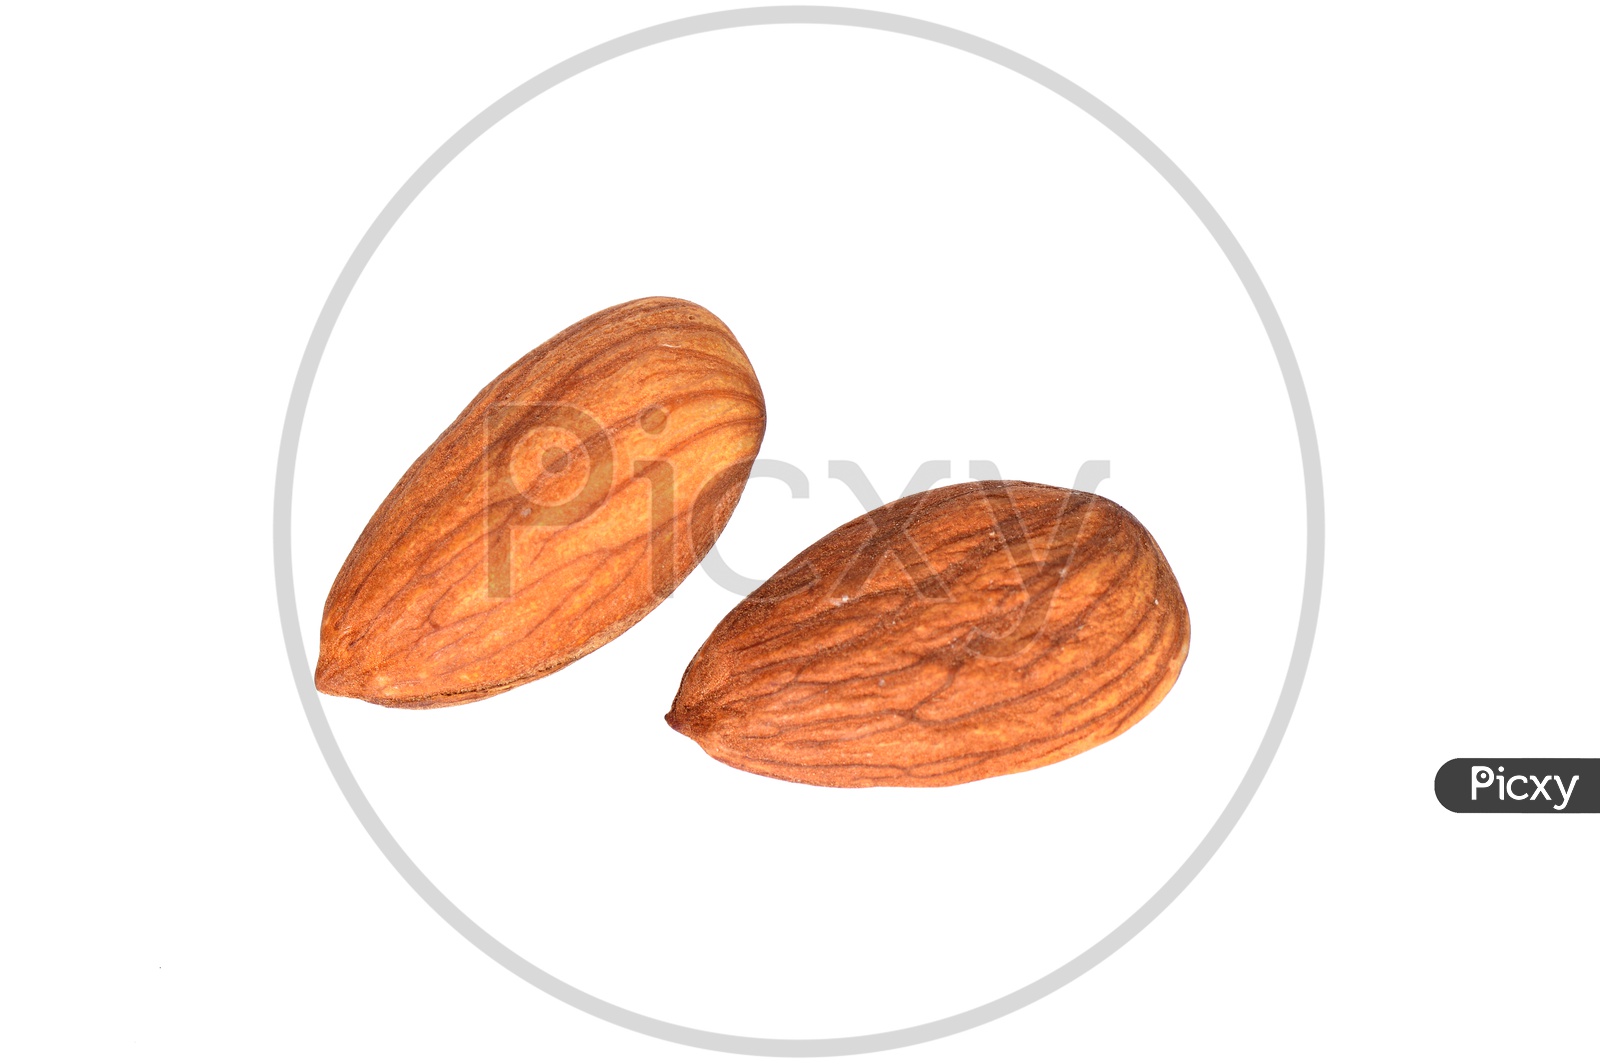 A Couple Of  Almond Or Badam Nuts on An Isolated White Background